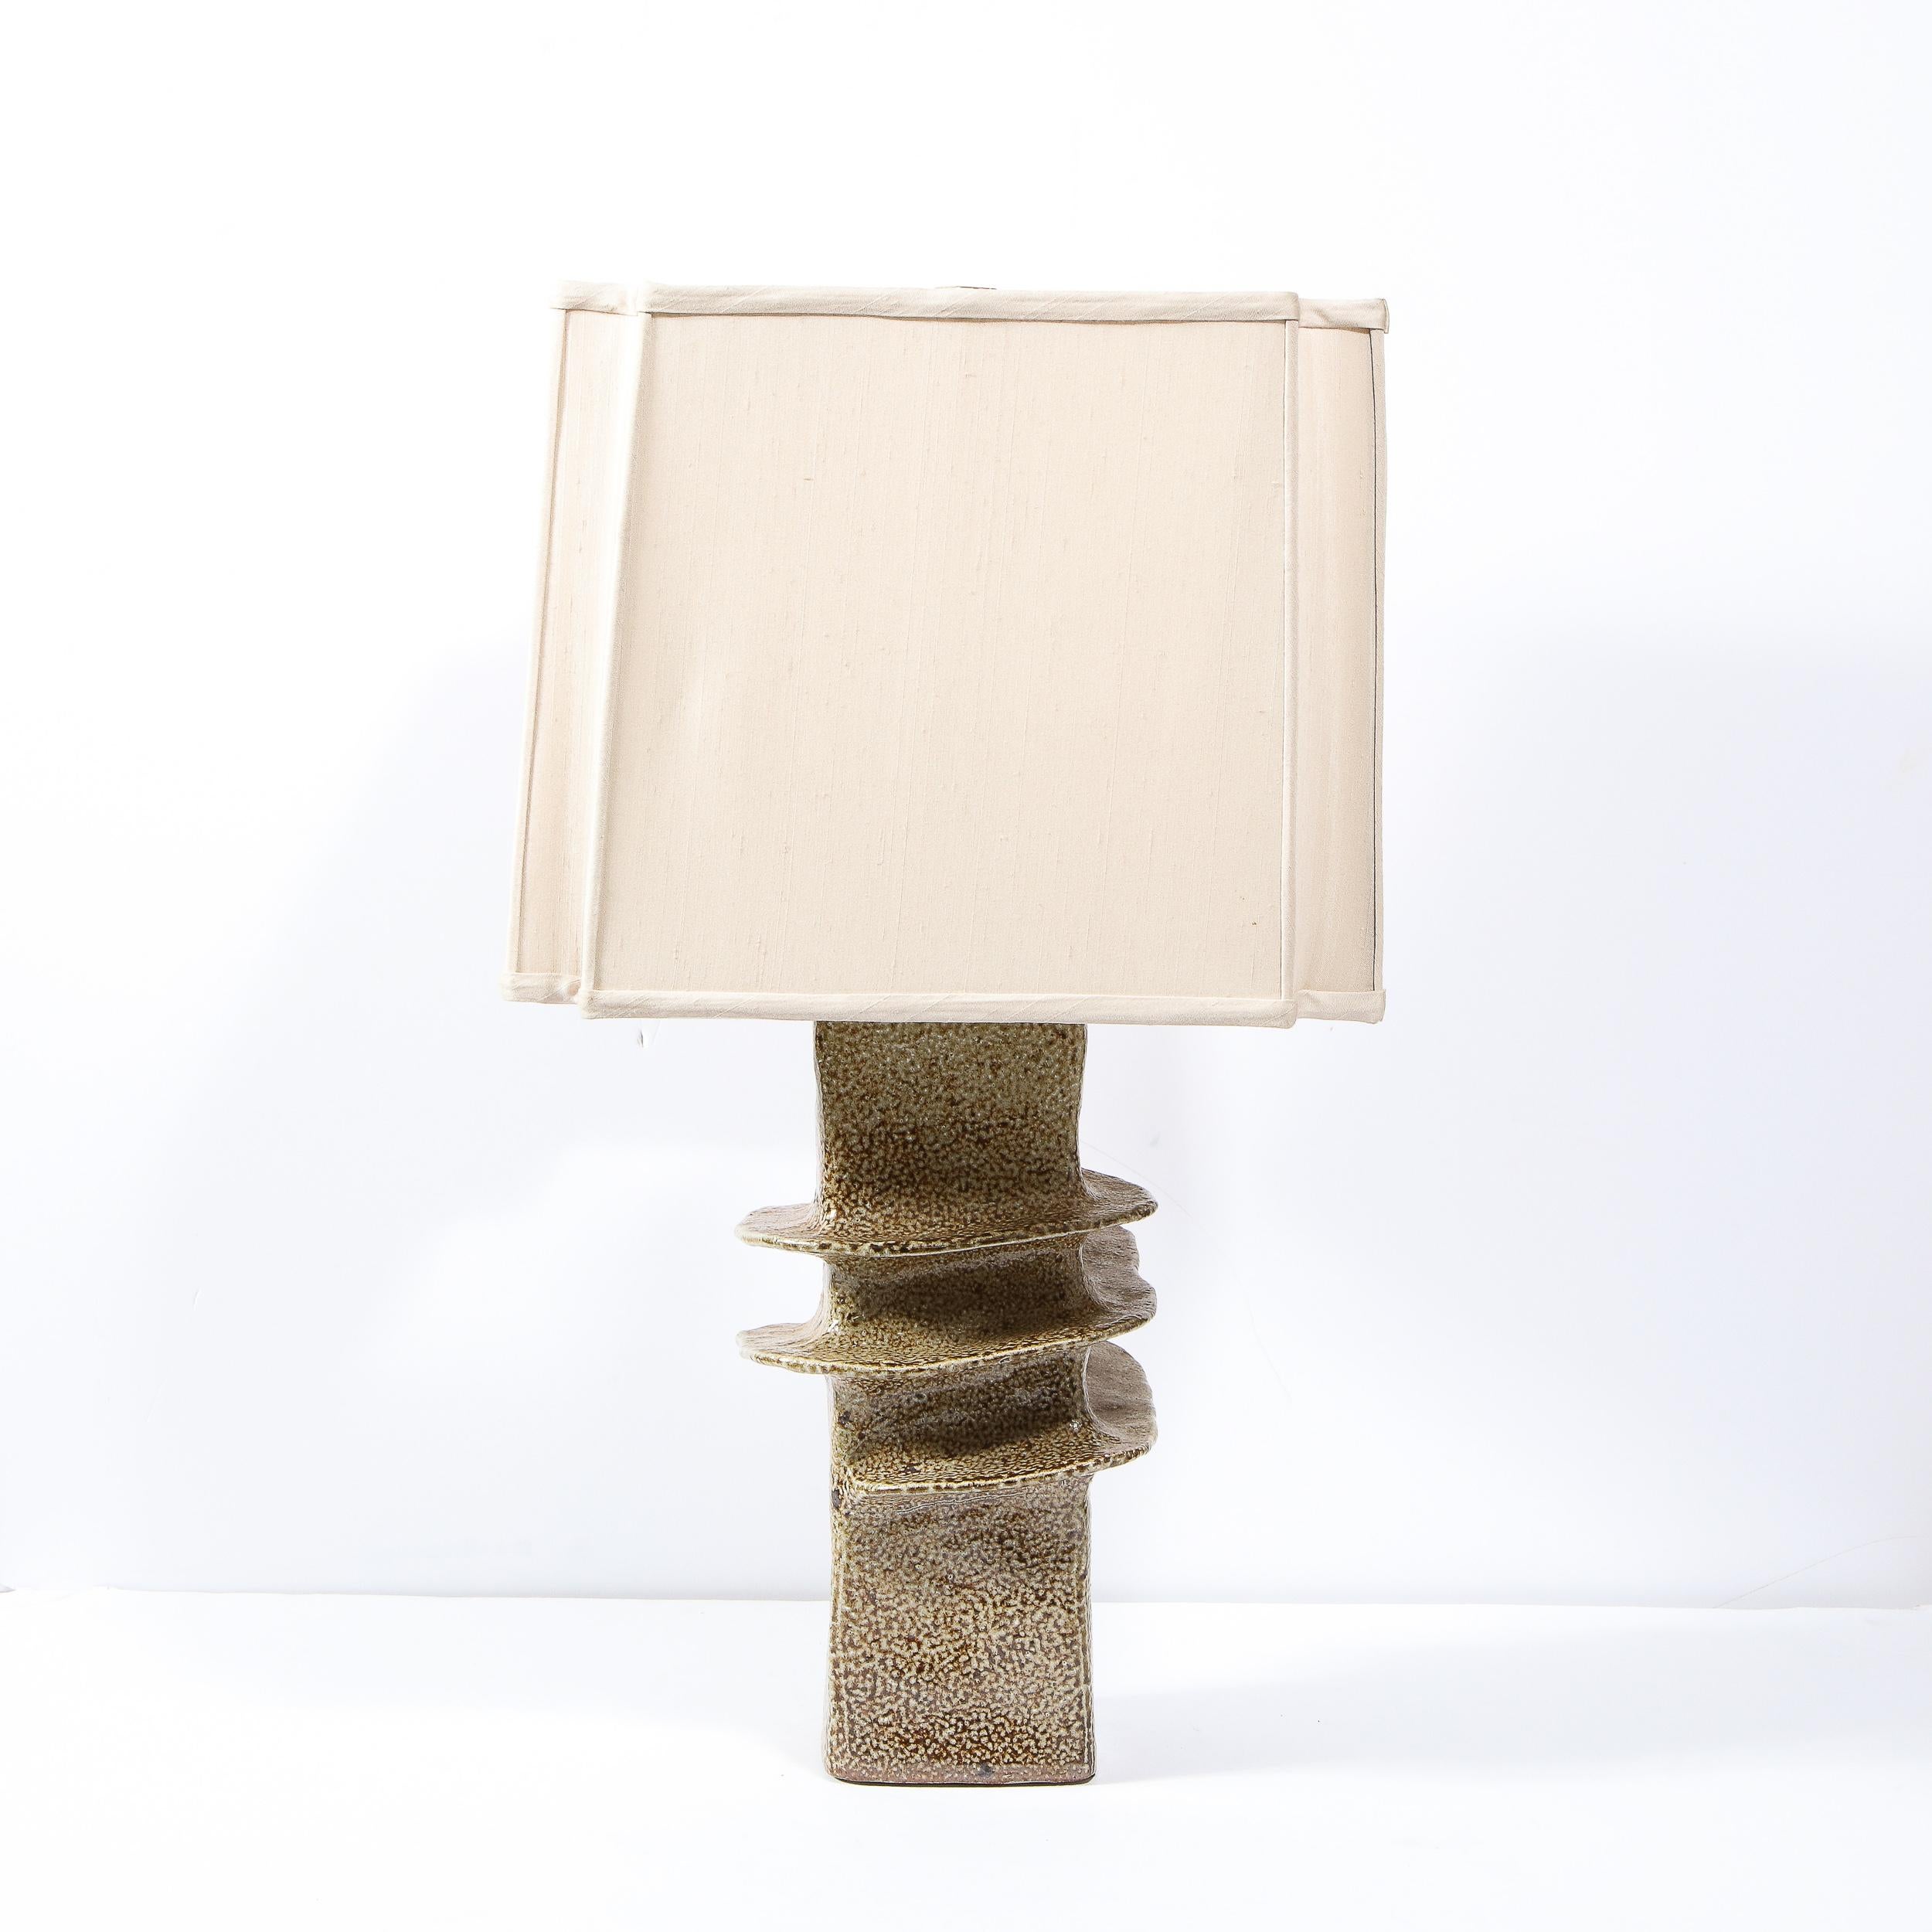 This exquisite glazed ceramic sculptural table lamp was realized in mid century France. It's earthy textural quality and hand shaped spiral configuration wrapping around a rectangular body creates a one of a kind unique design. With a new custom